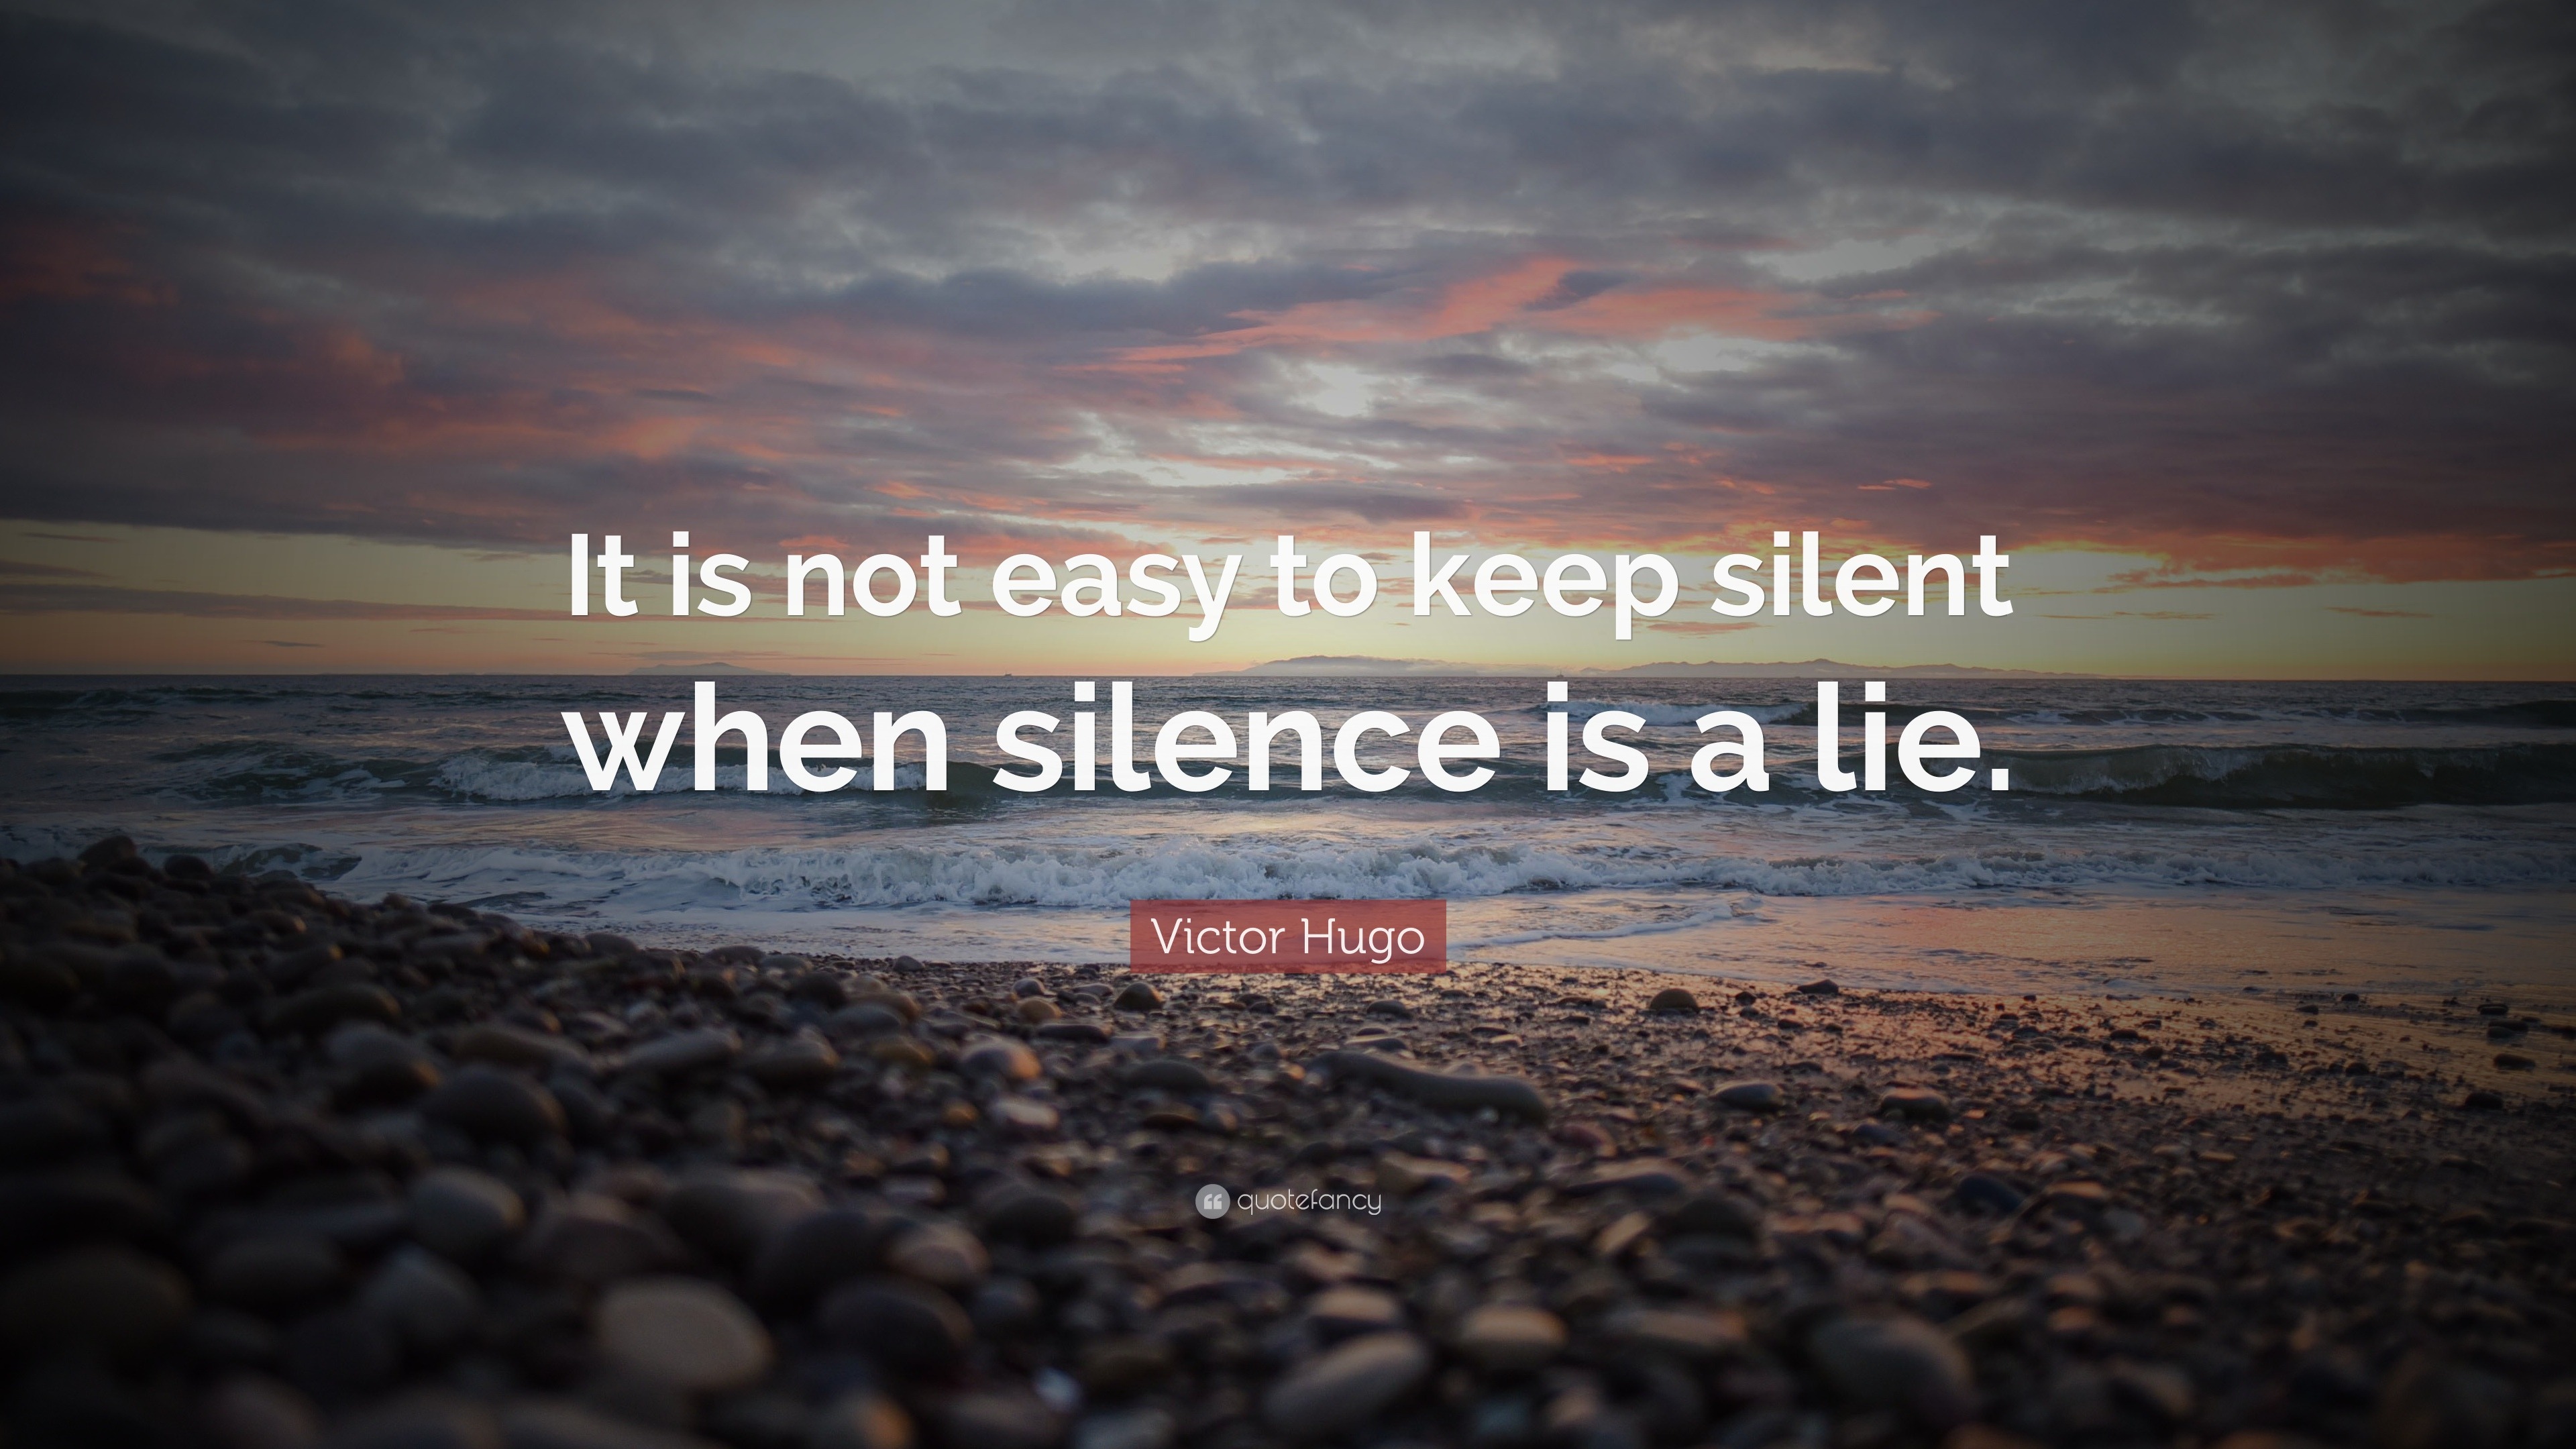 Victor Hugo Quote: “It is not easy to keep silent when silence is a lie